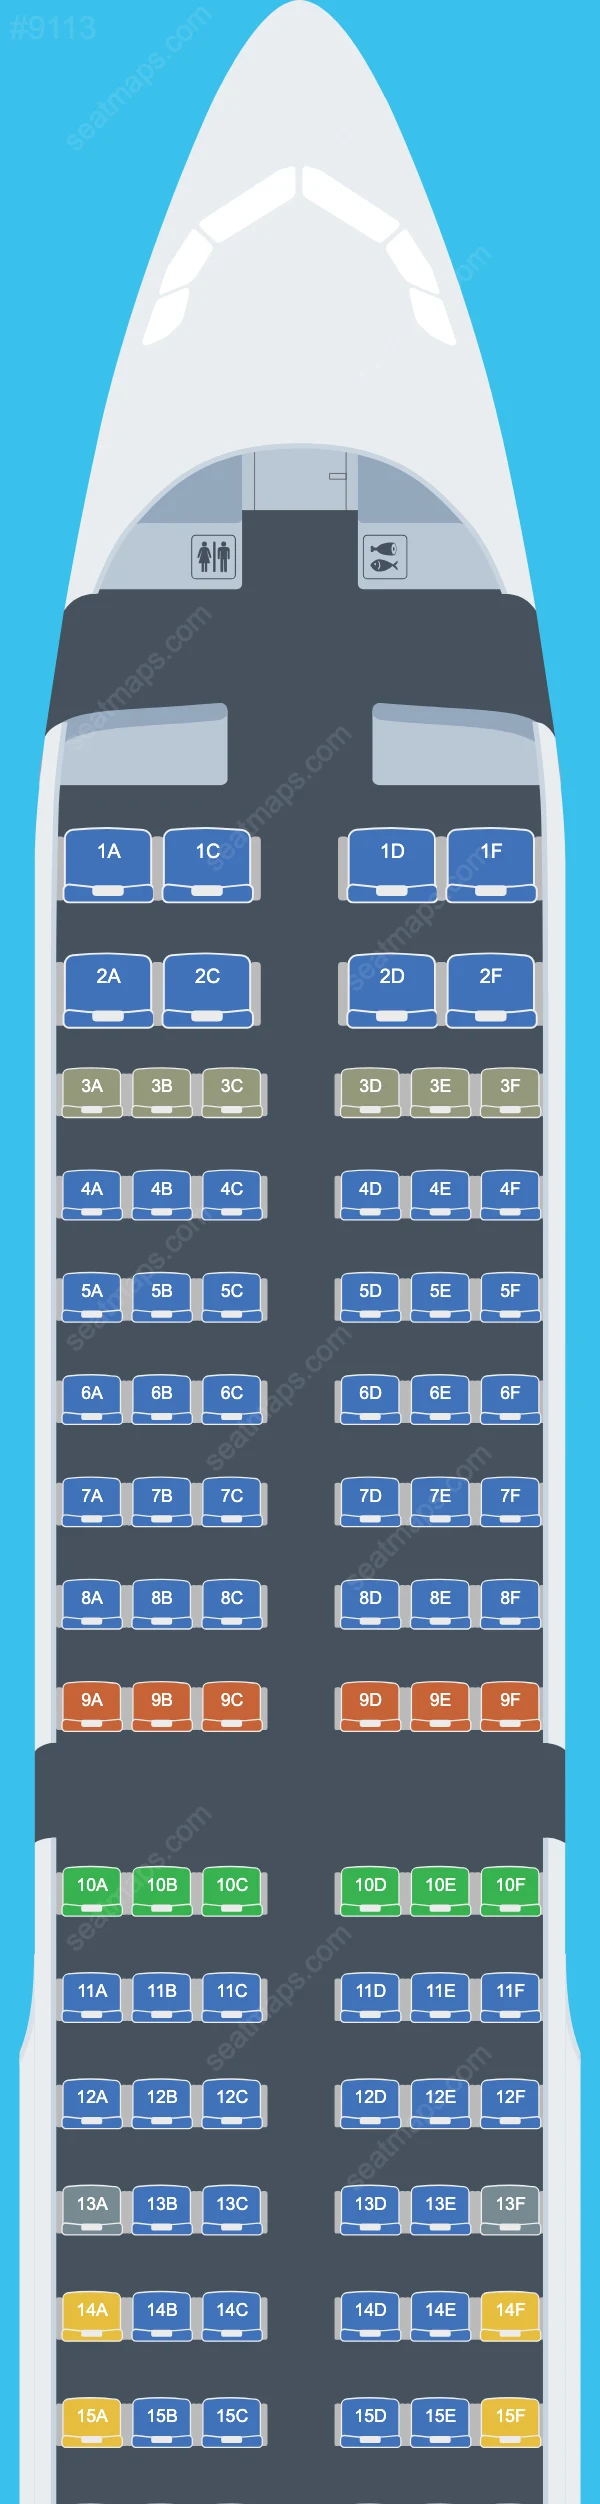 Bamboo Airways Airbus A321 Seat Maps A321-200